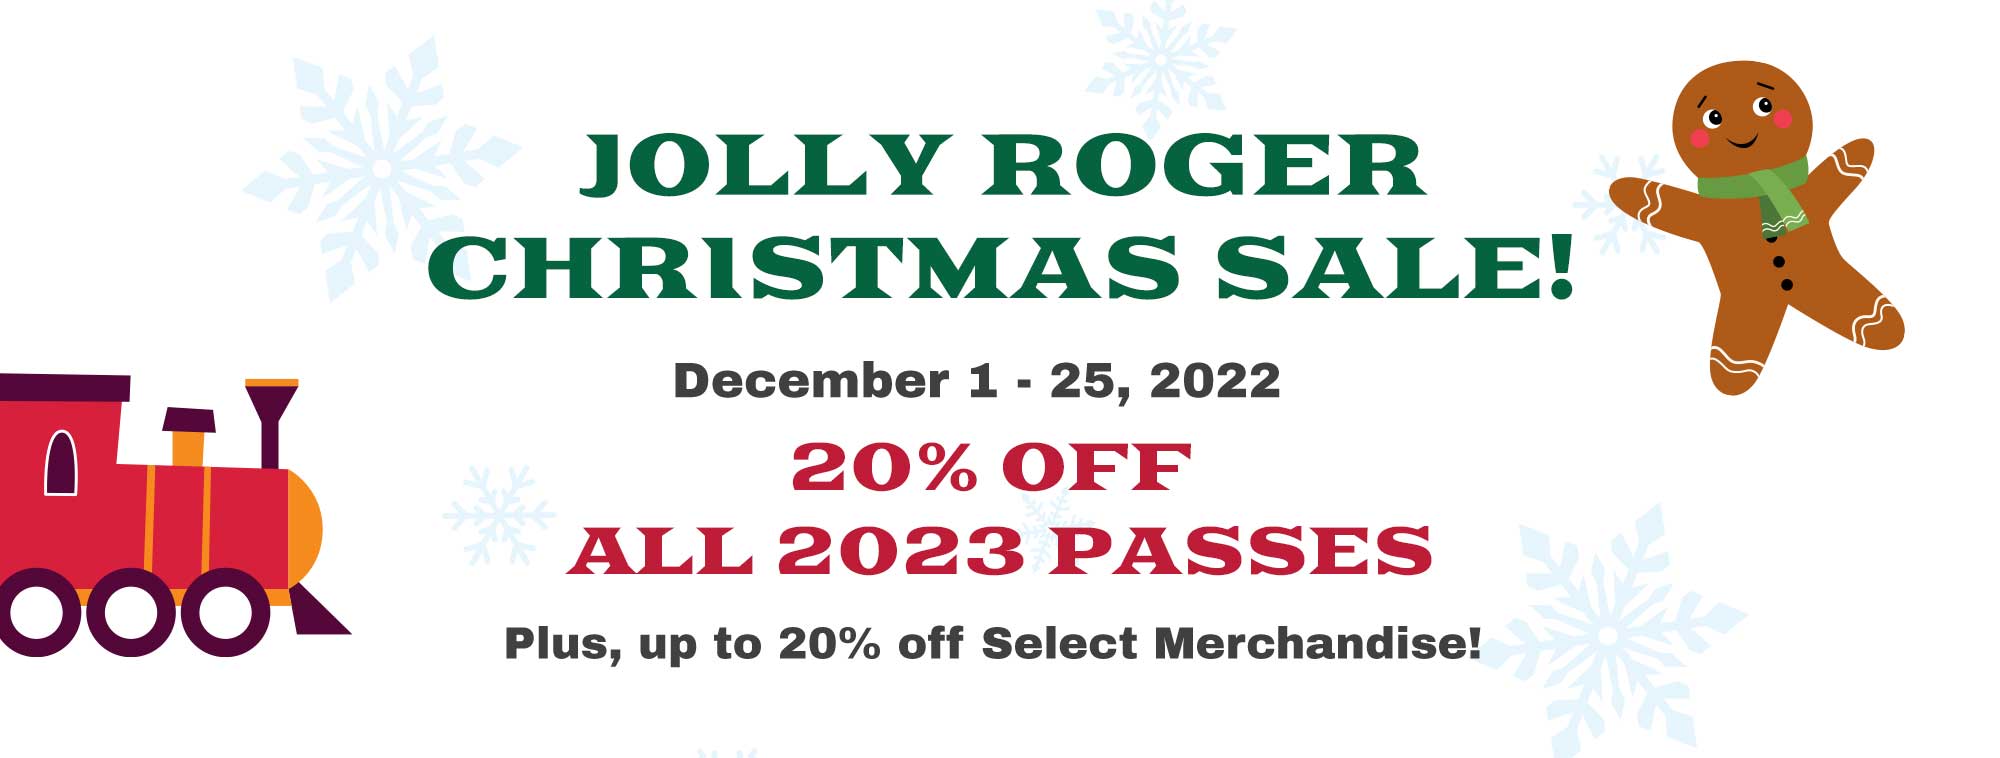 Jolly Roger Christmas Sale! December 1 - 25, 2022. 20% Off All 2023 Passes. Plus, up to 20% off Select Merchandise!